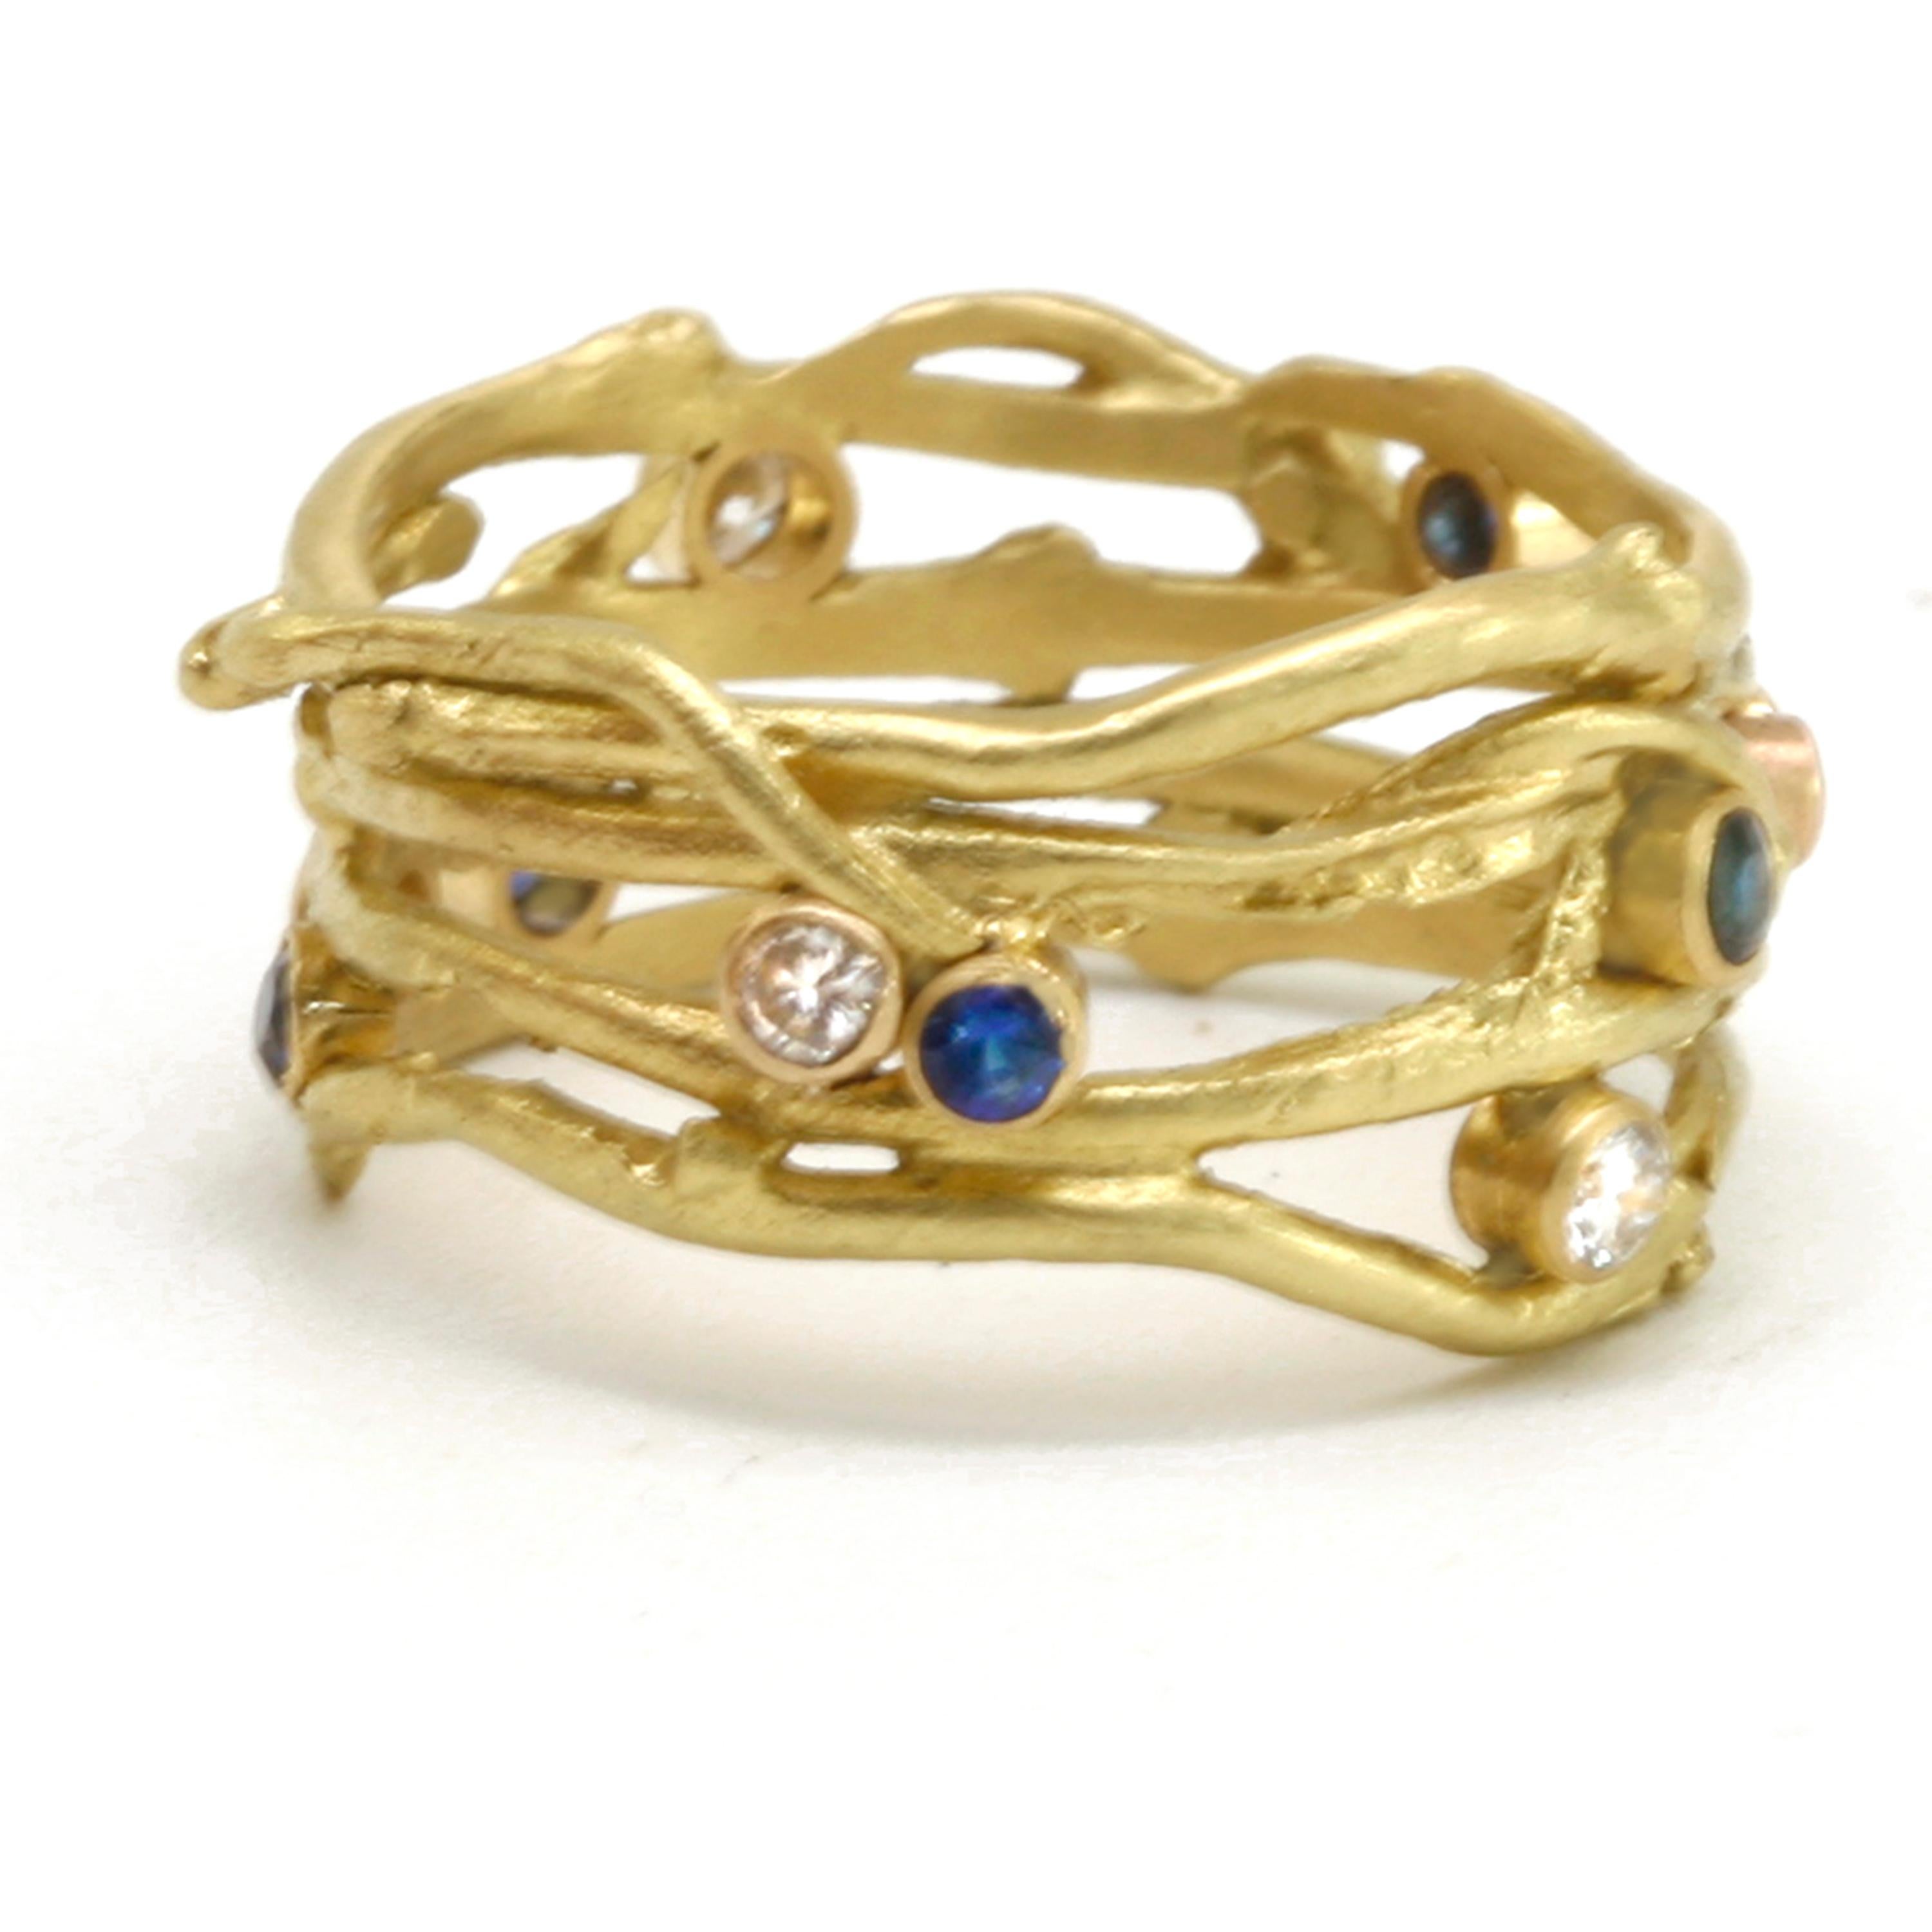 Nantucket has been home for my family for 5 generations. My design sense is clearly seen in This Twig Ring is made of solid gold taken from cedar trees near the island's Bartlett Farm area. Once they are made of 18k gold I can twist the twigs into a